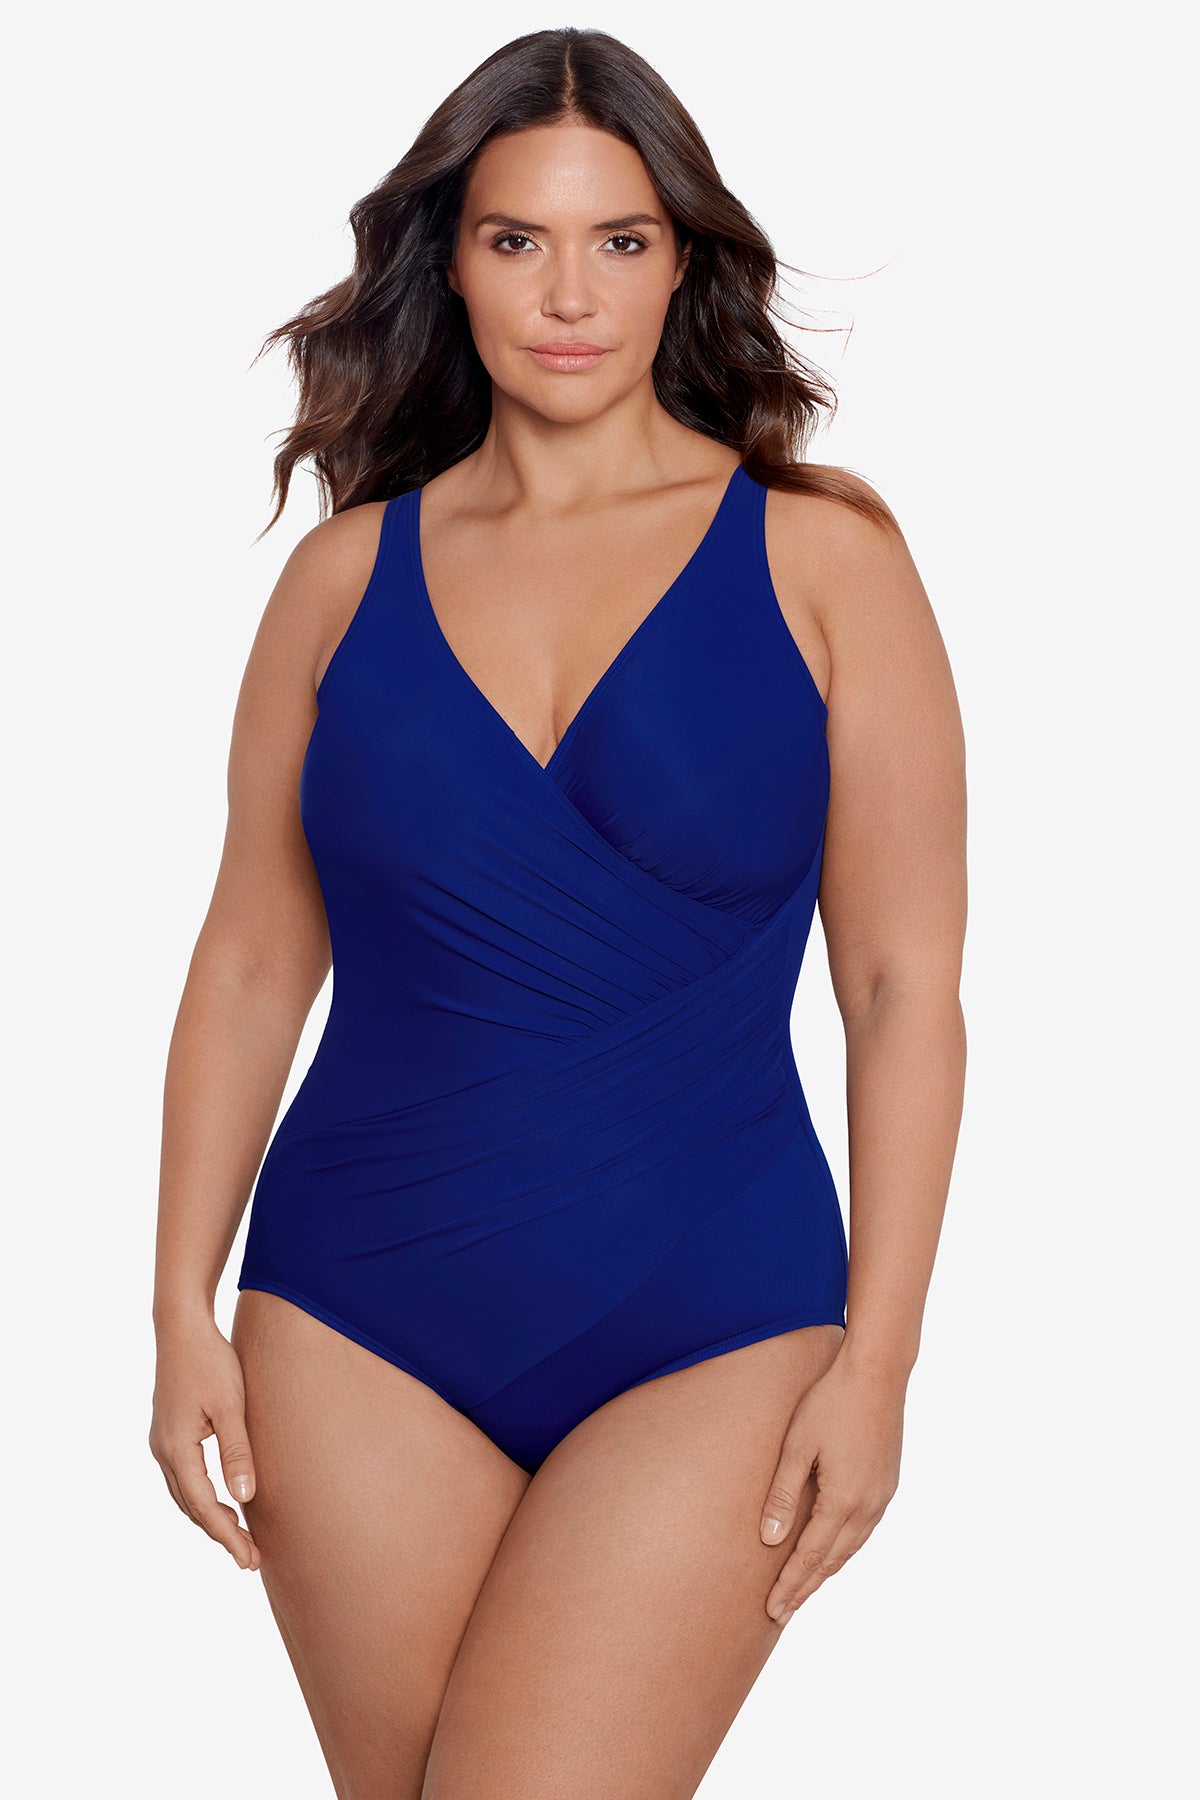 Shop by BRAND - SPANX / SKIMS / MIRACLESUIT - Big Brand Wholesale